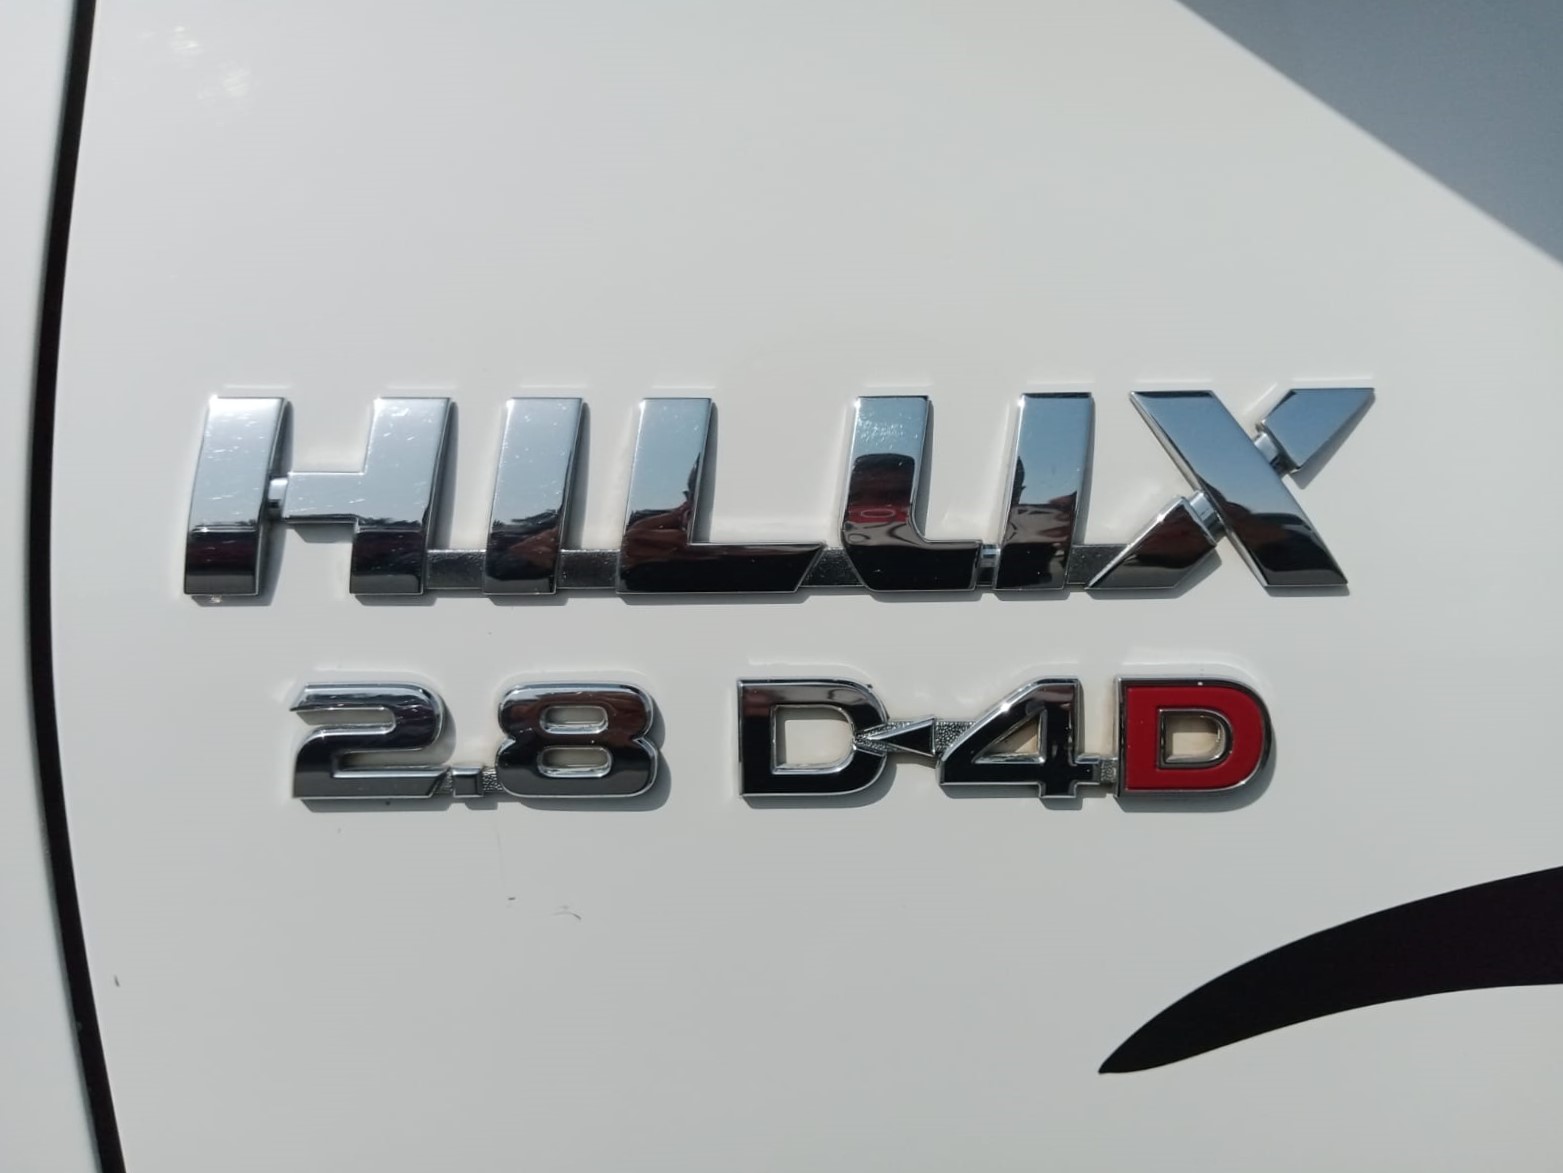 1448 TOYOTA HILUX PICK UP AT 2.8 WHITE